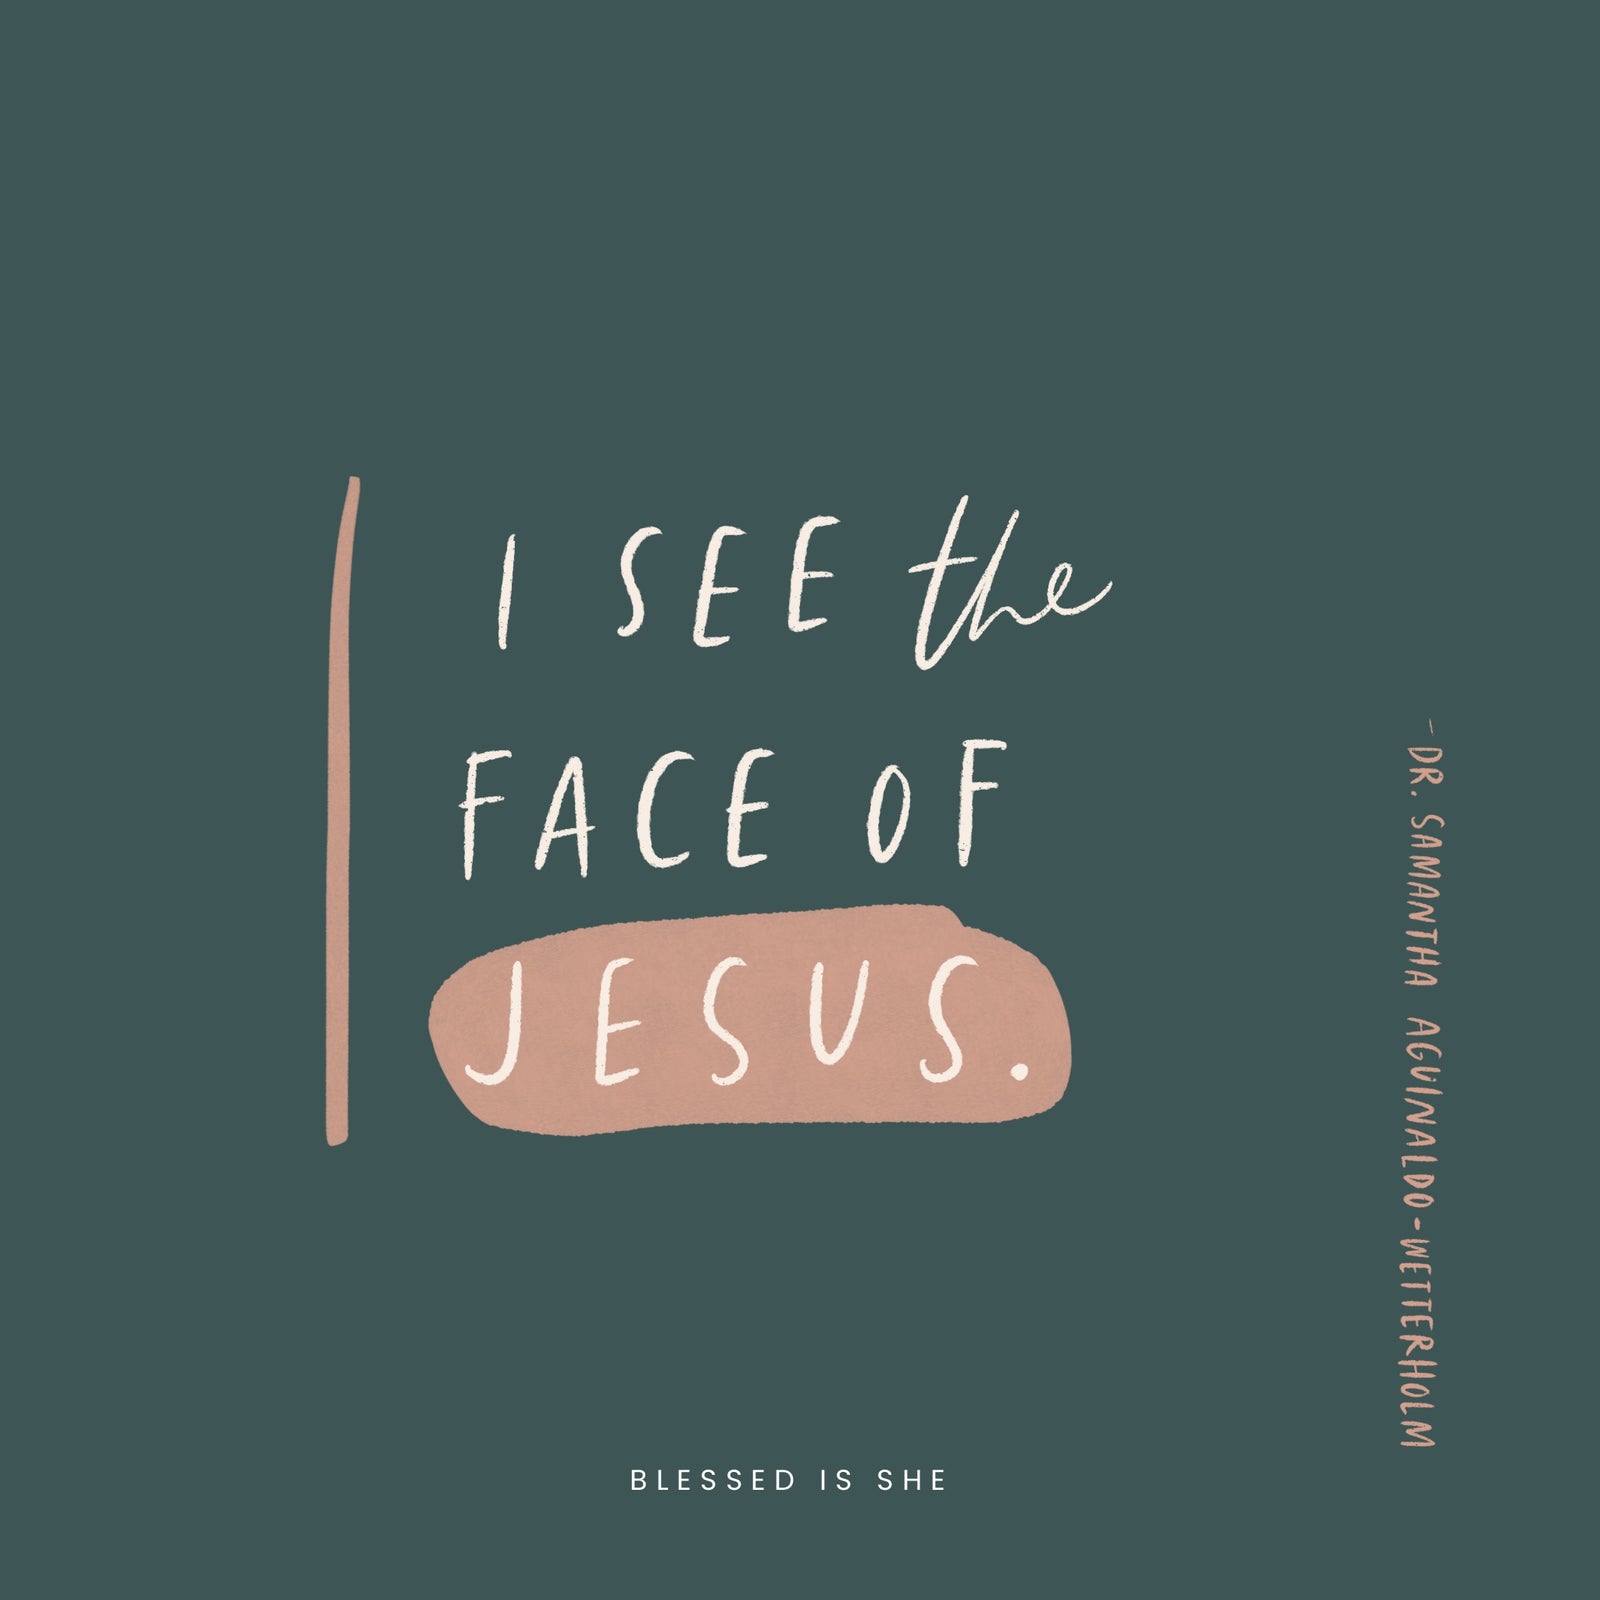 Recognizing the Face of Jesus